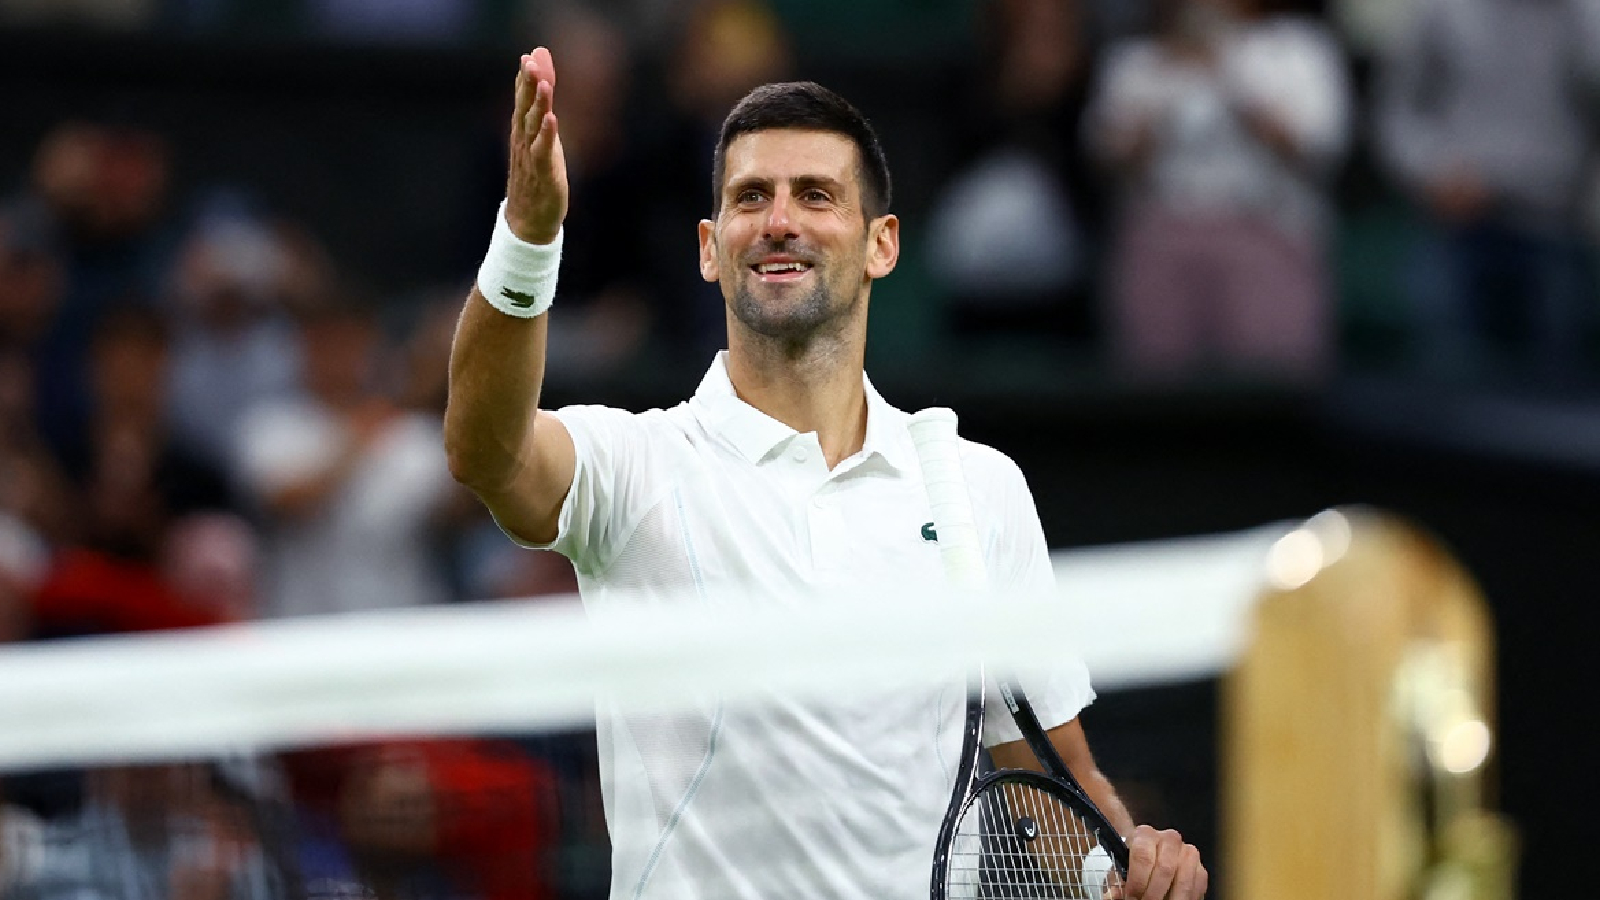 They're going to convert all tennis clubs into paddle or pickleball clubs: Novak Djokovic expresses concerns about economic crisis in sport | Tennis news